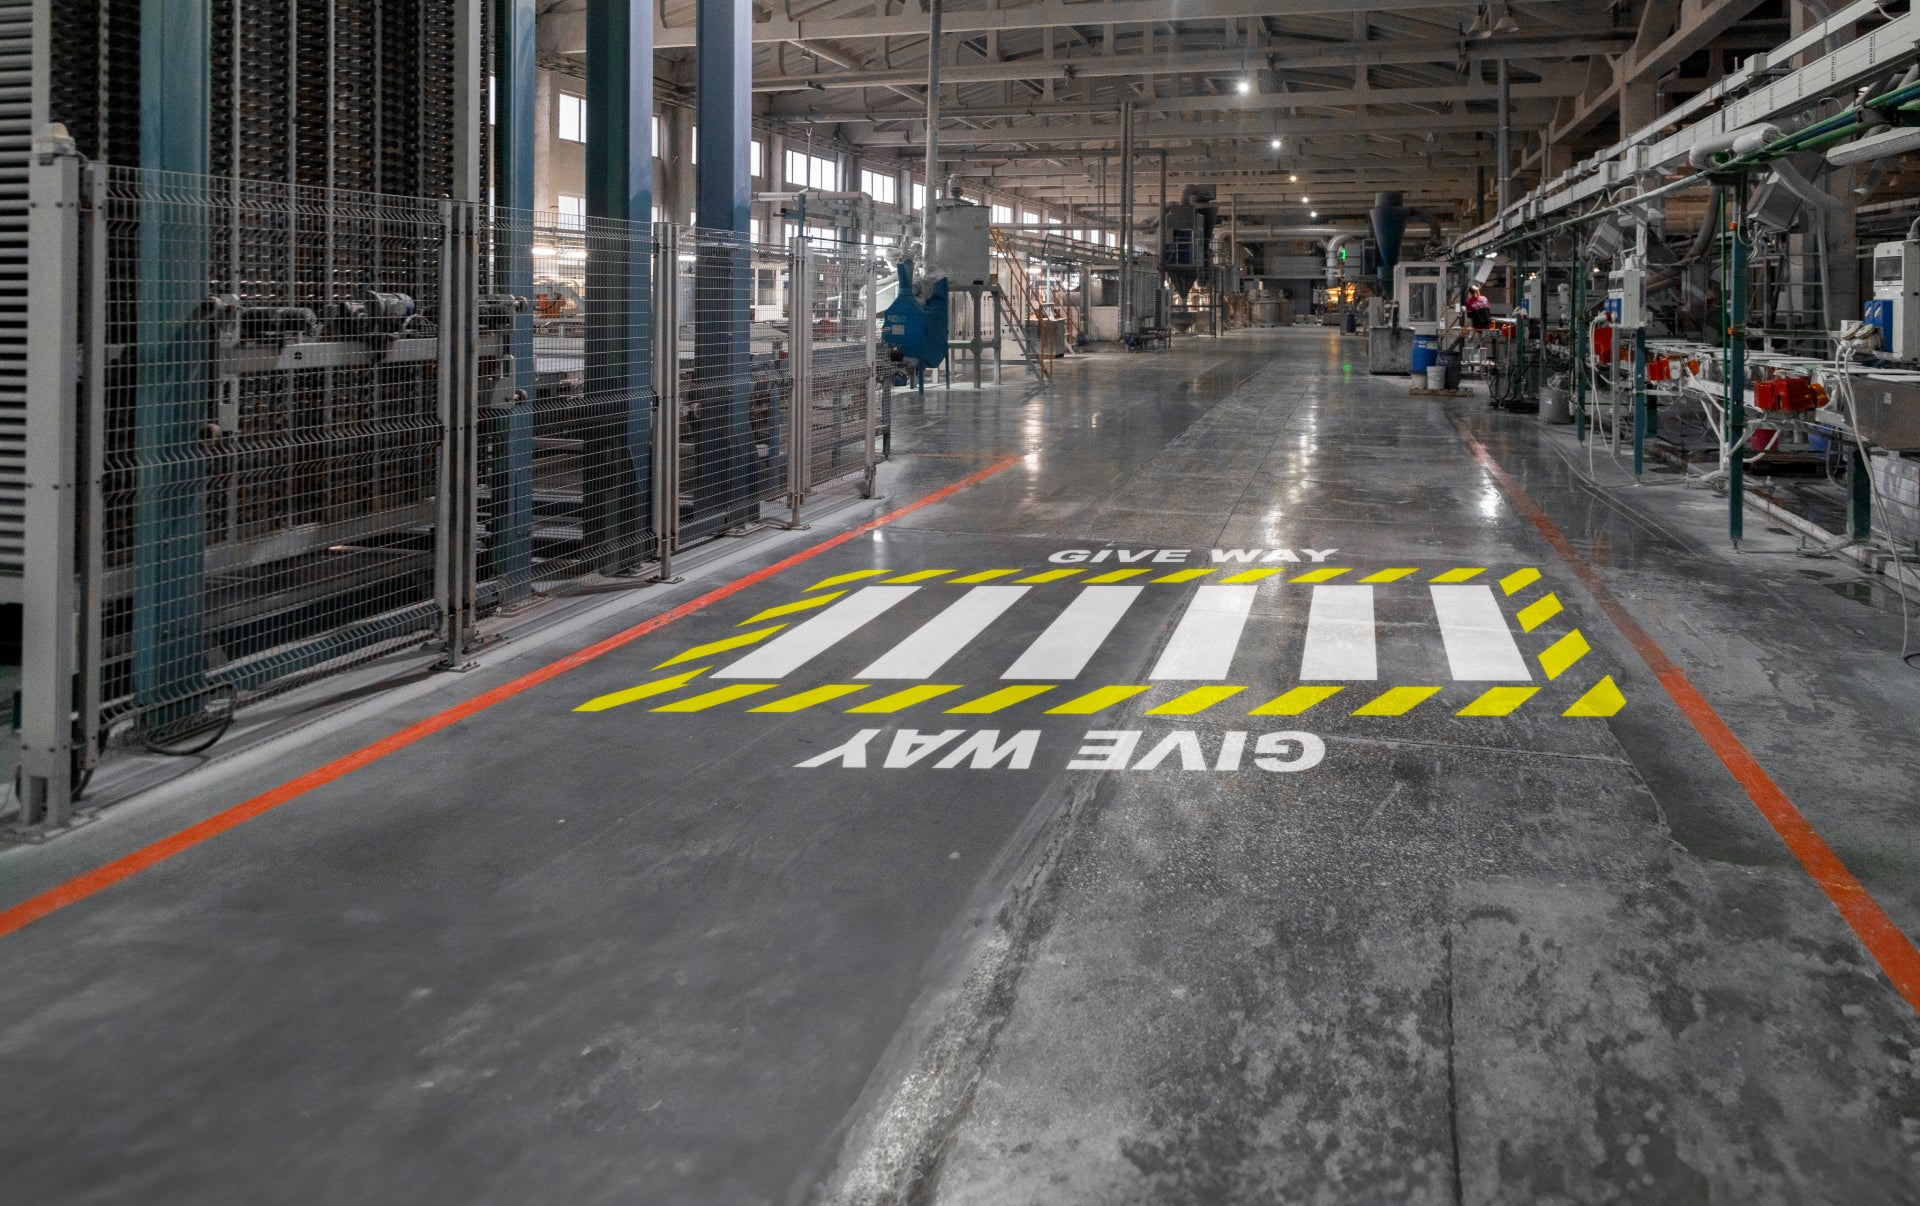 Give way floor marking and zebra crossing sign projected onto a warehouse floor.